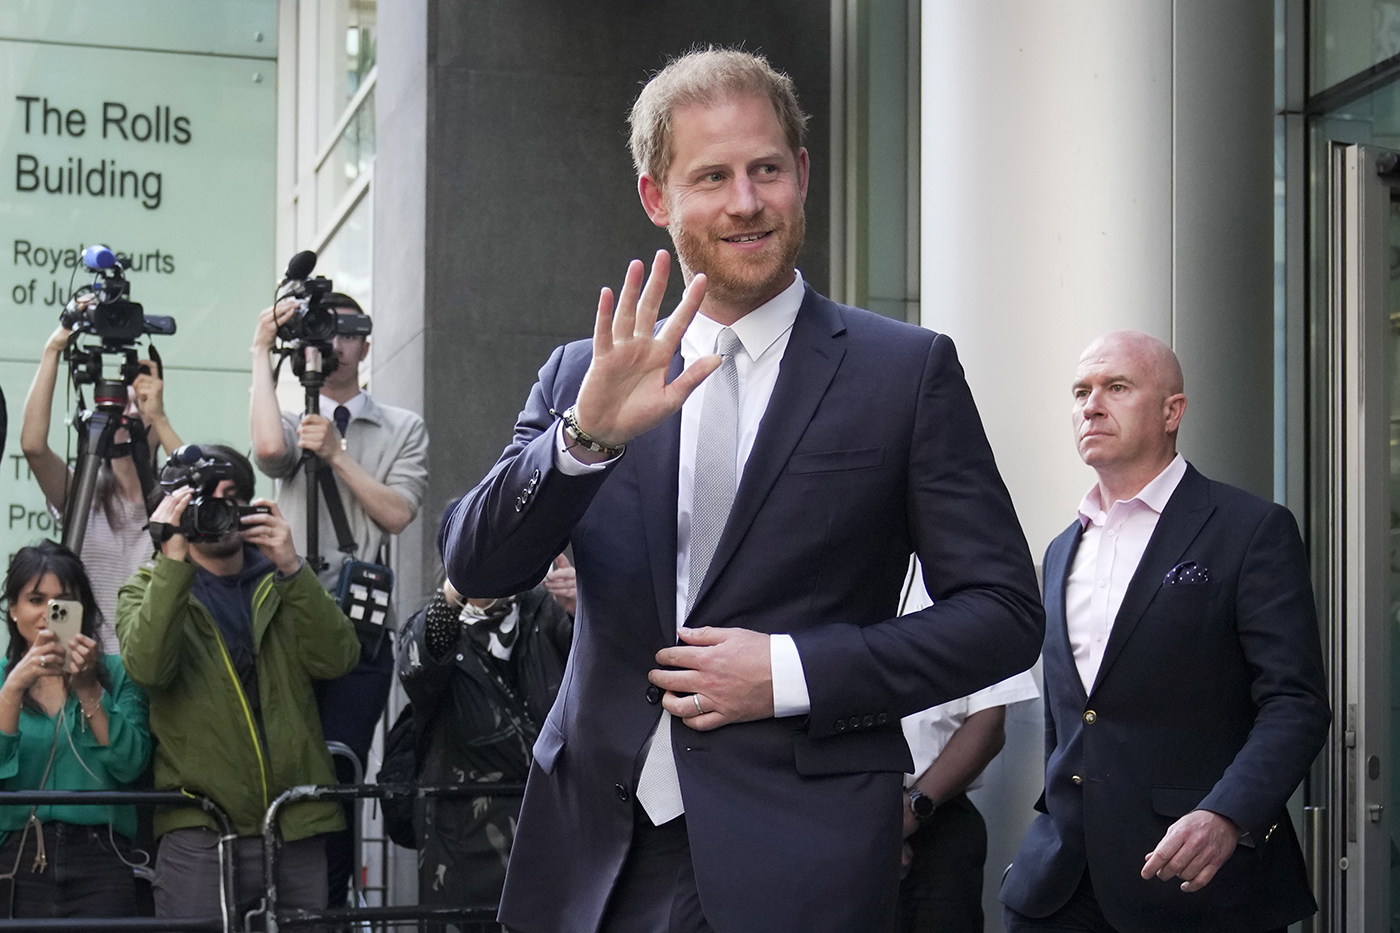 How the British Tabloids May Have Hacked Prince Harry's Phone